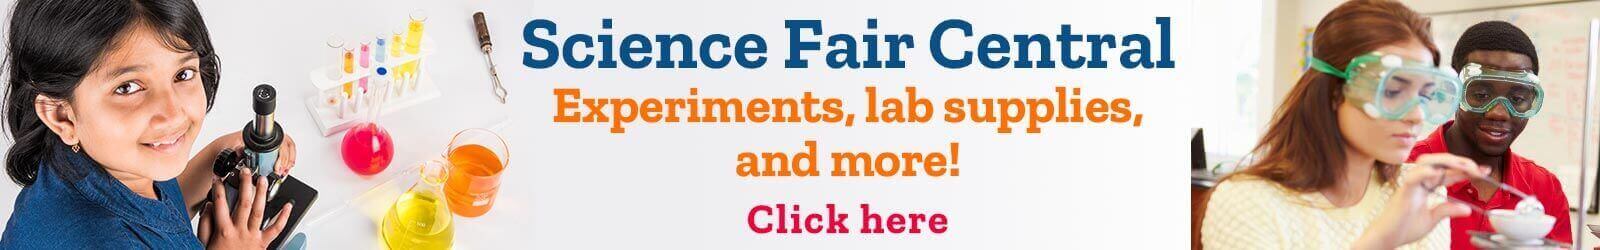 Science Fair Central Experiments, lab supplies, and more!